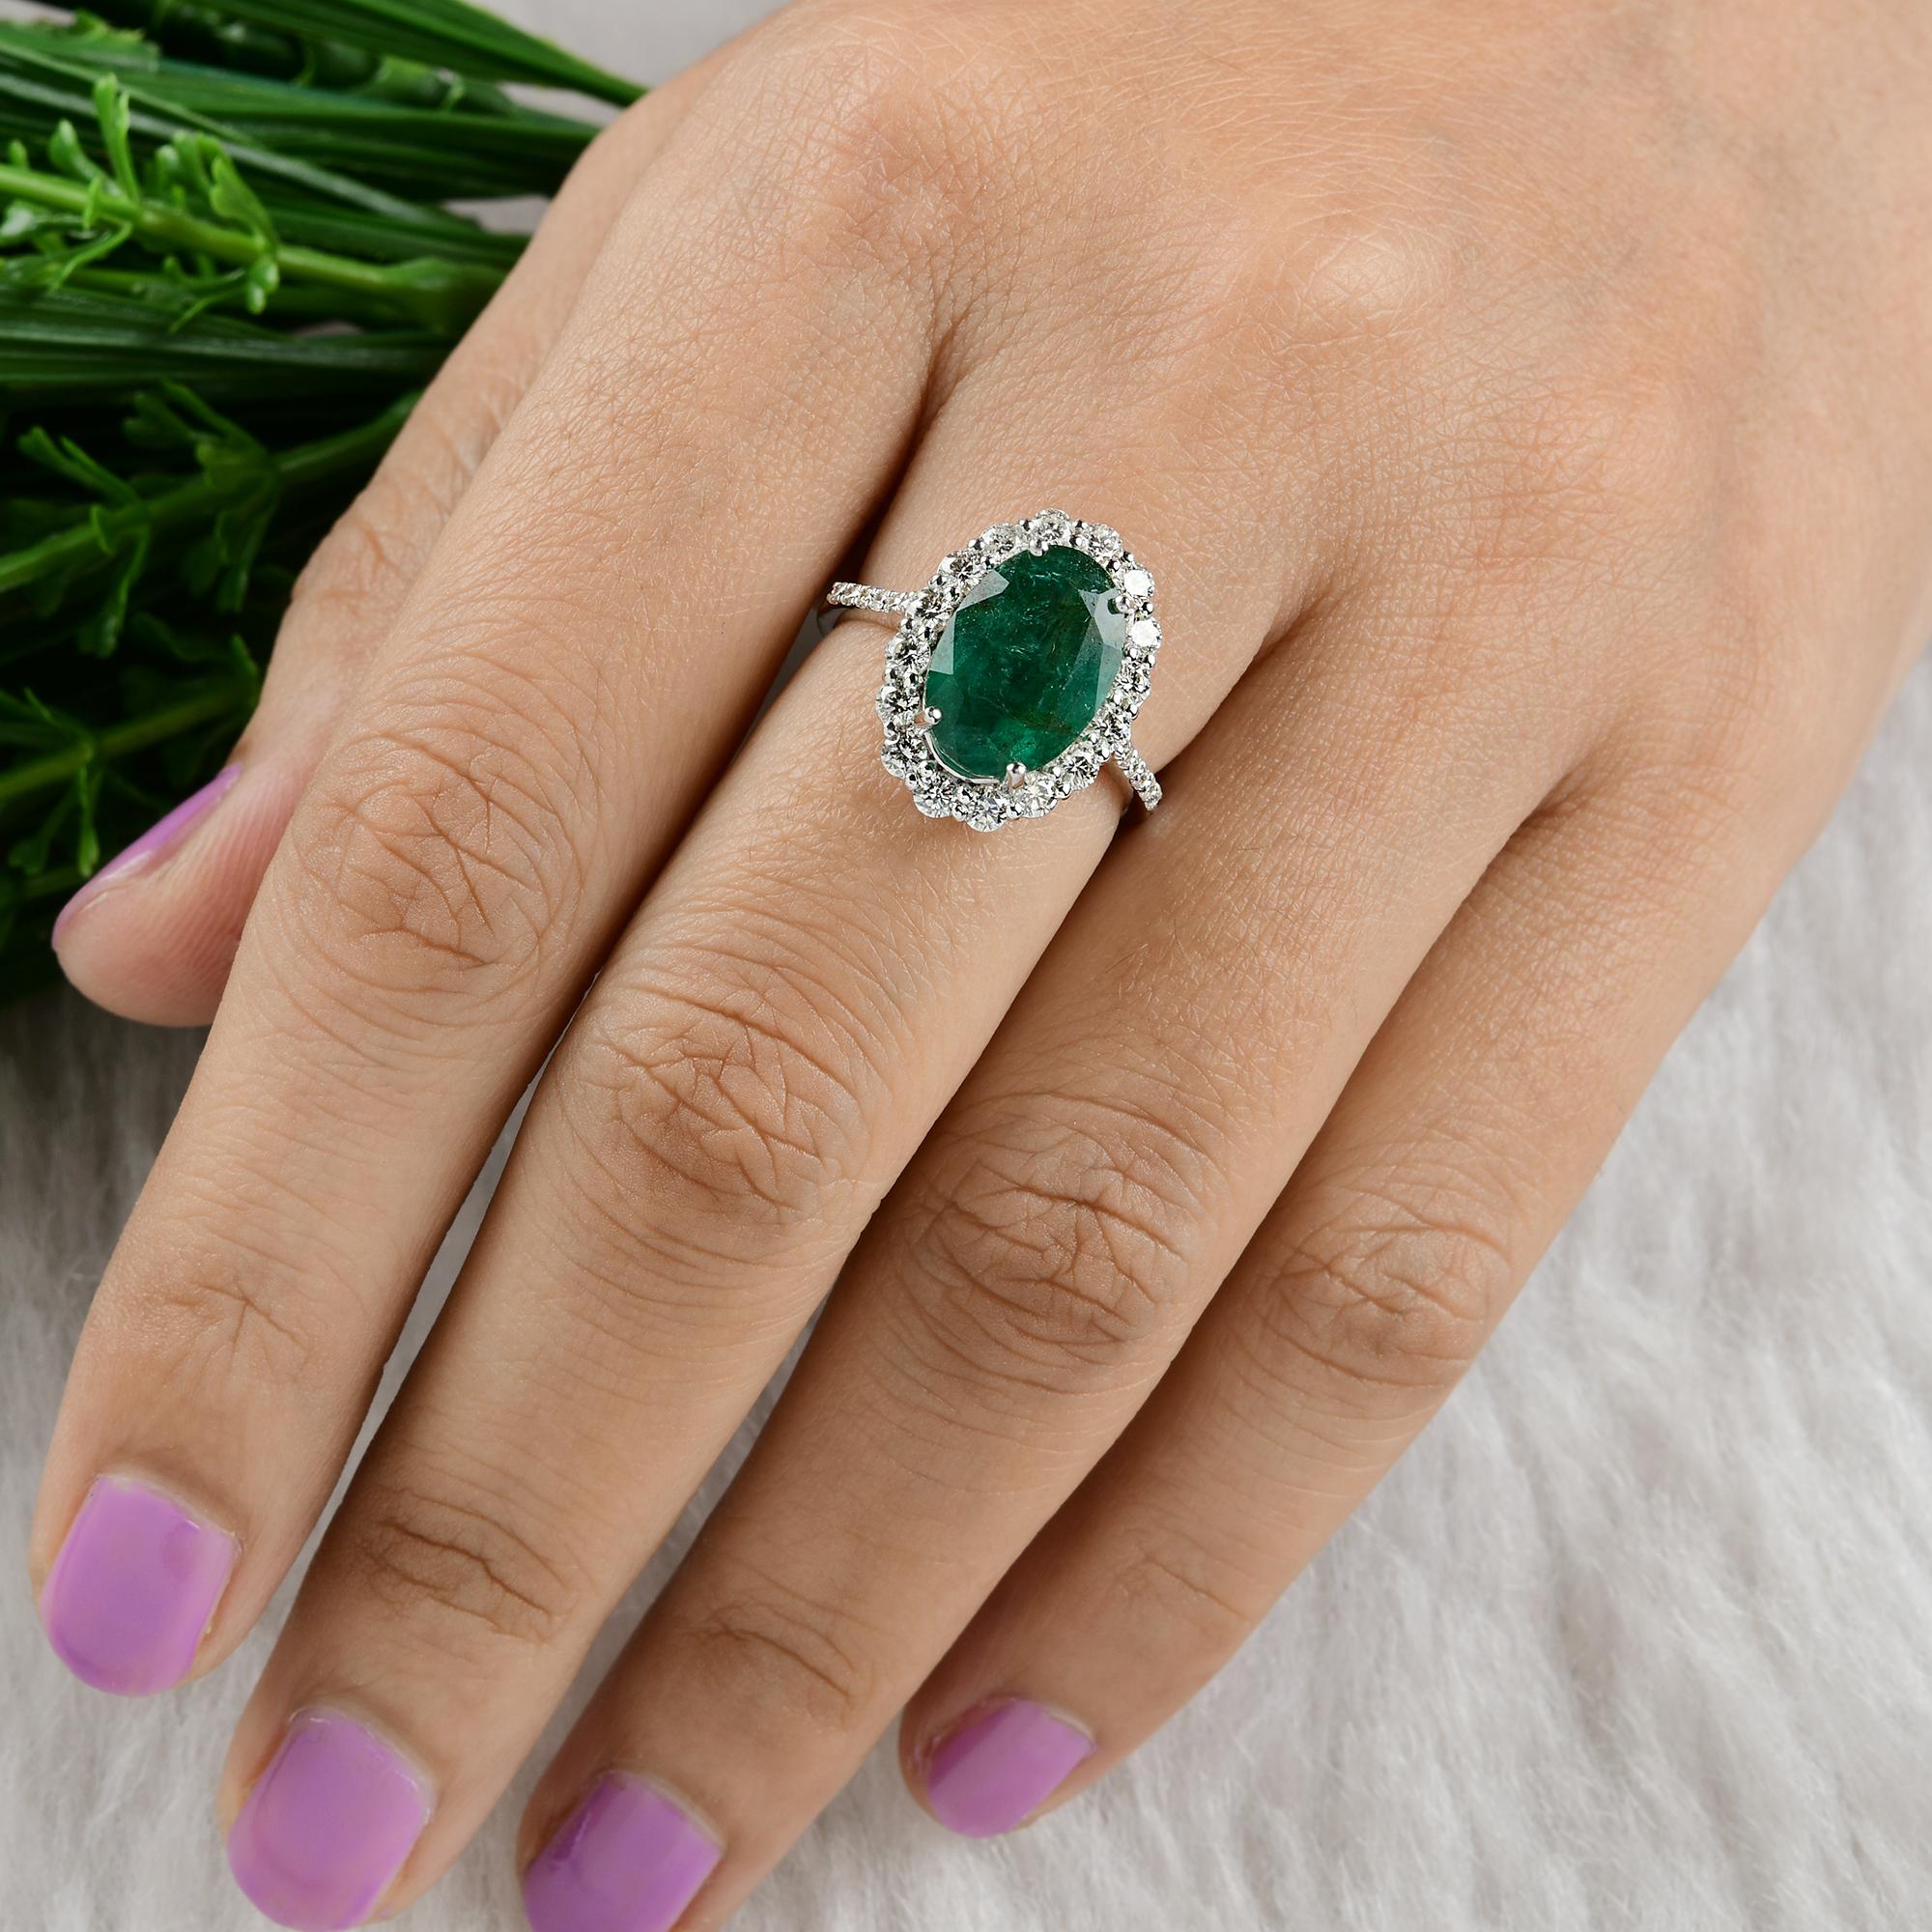 Oval Cut Natural Emerald Gemstone Cocktail Ring Diamond Pave 18 Karat White Gold Jewelry For Sale